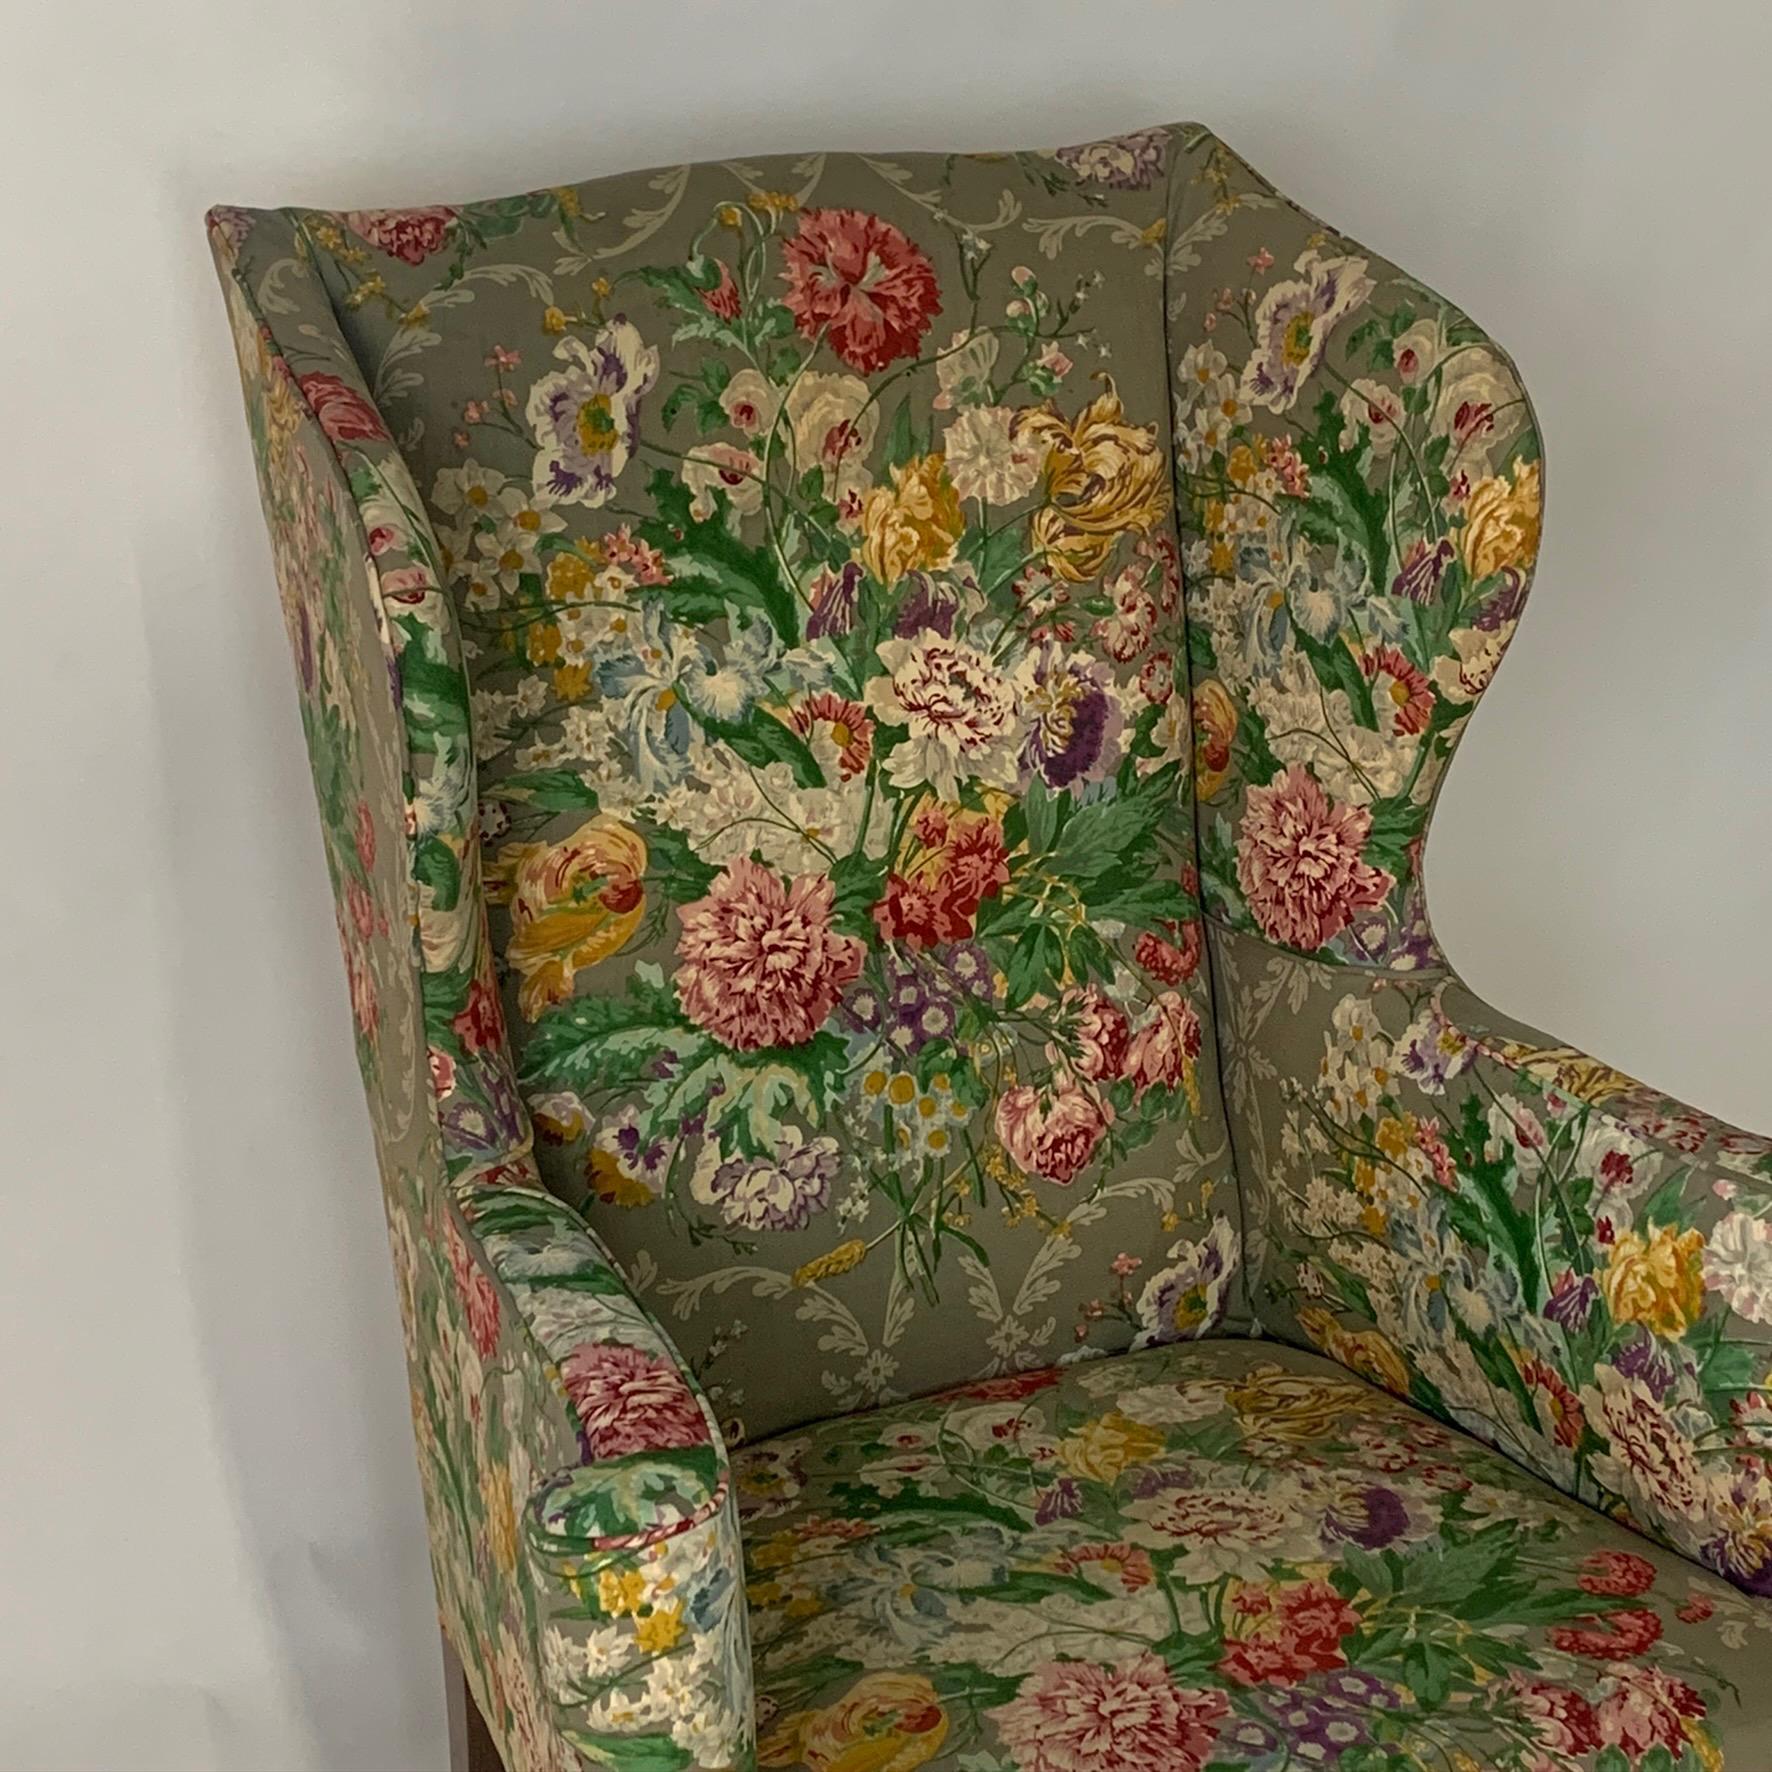 Exceptional Early American Wingback Chairs with Stunning Floral Upholstery 1